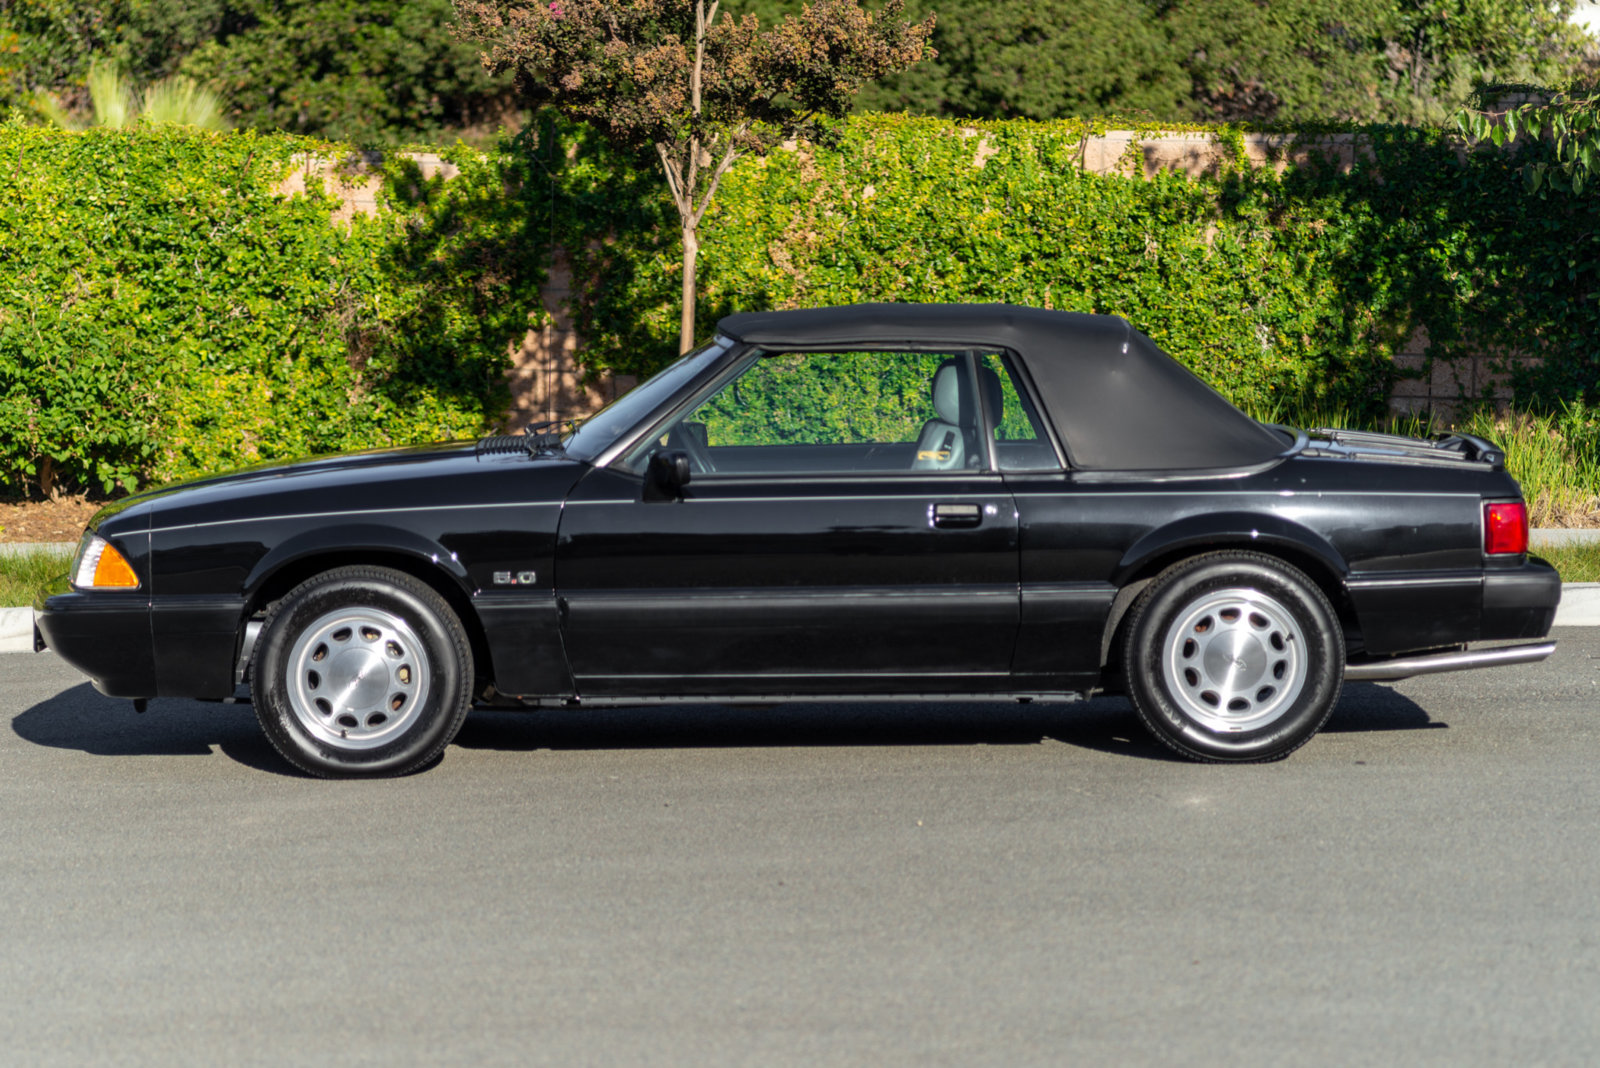 Black 1989 Ford Mustang